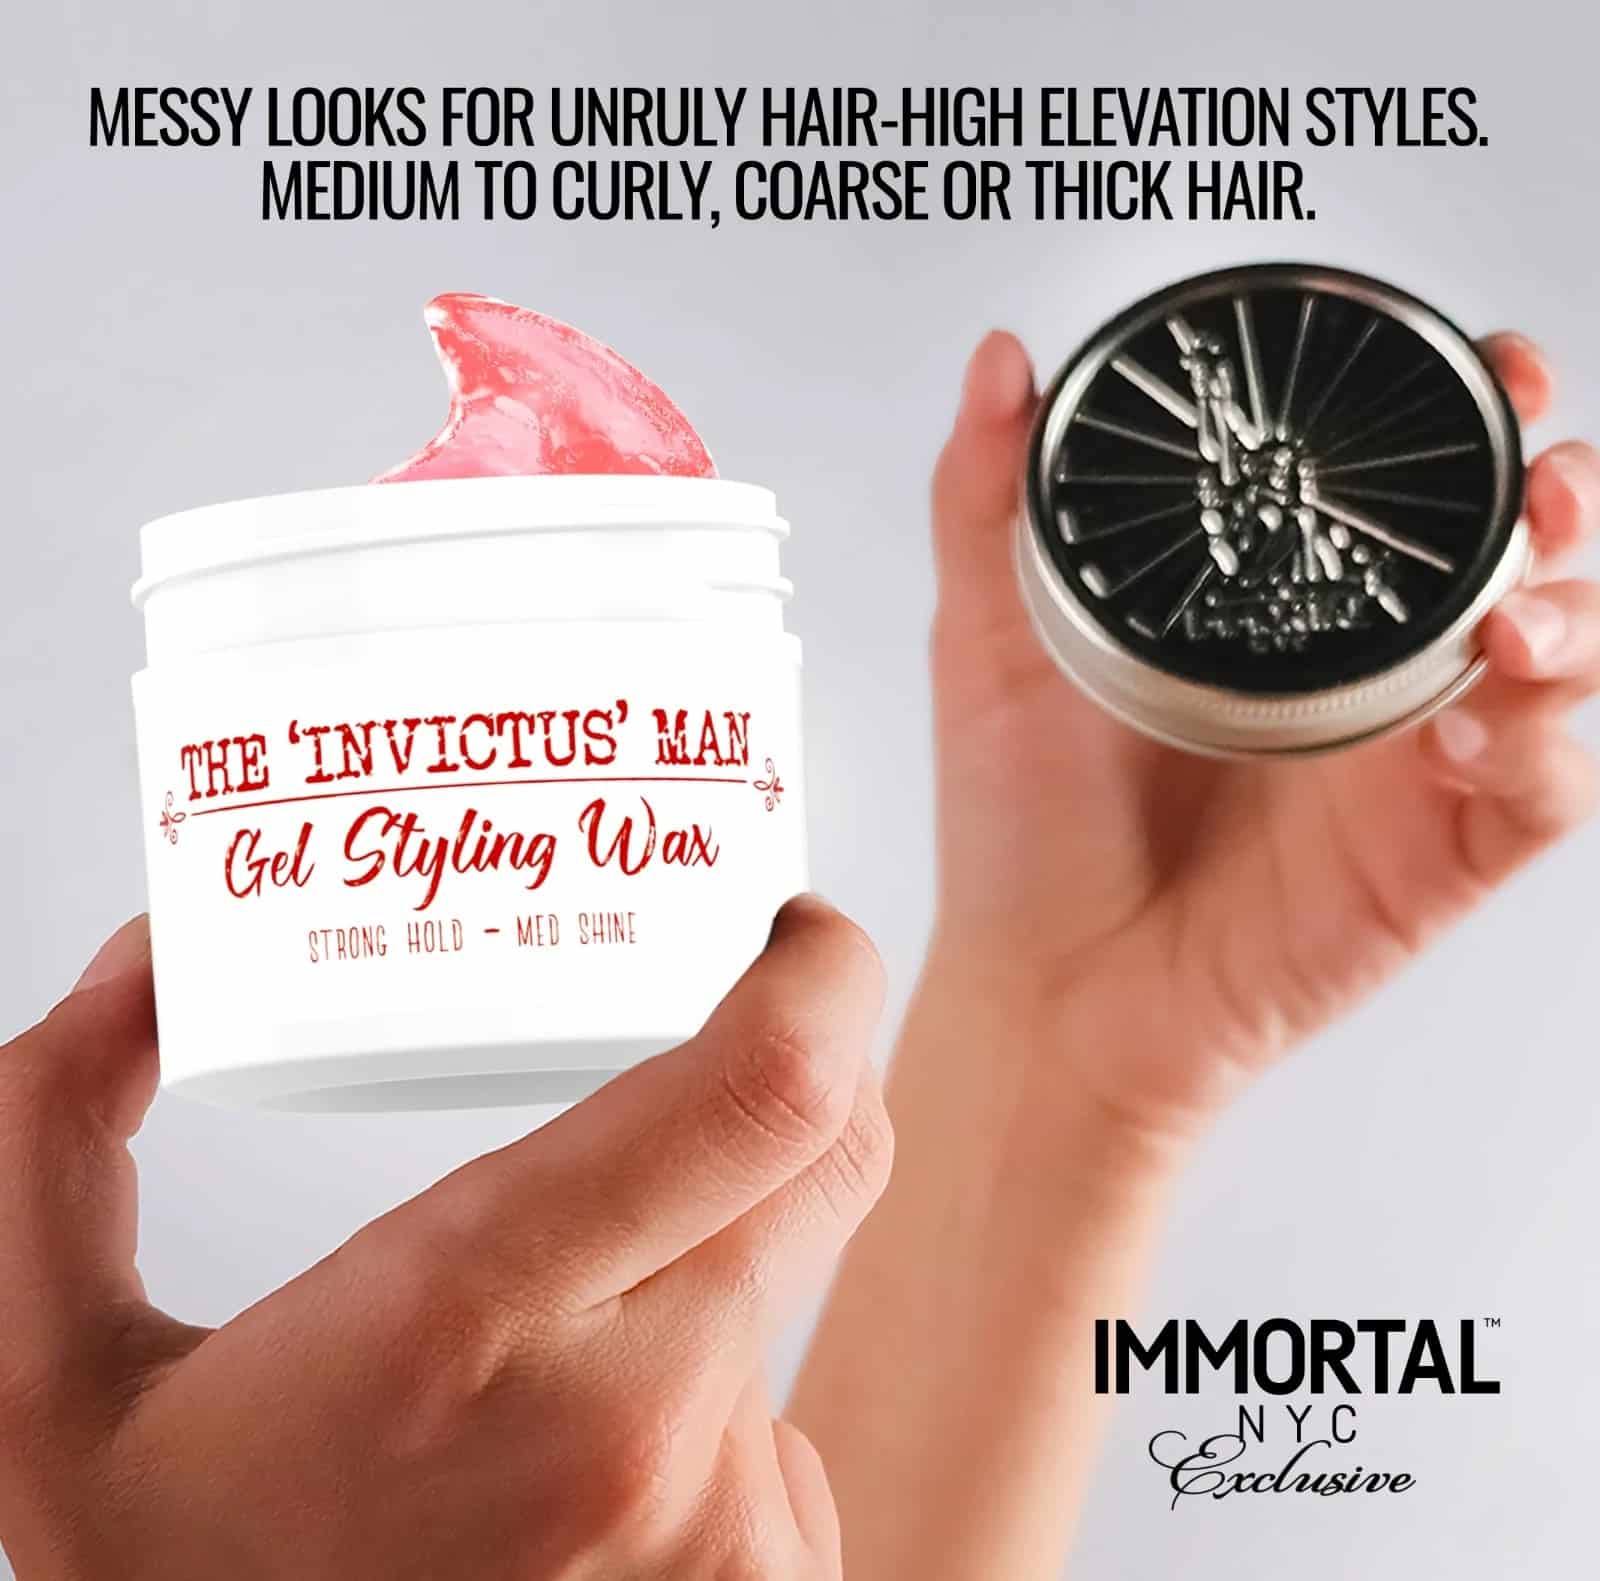 Immortal NYC The Invictus Man Gel Styling Wax Poster